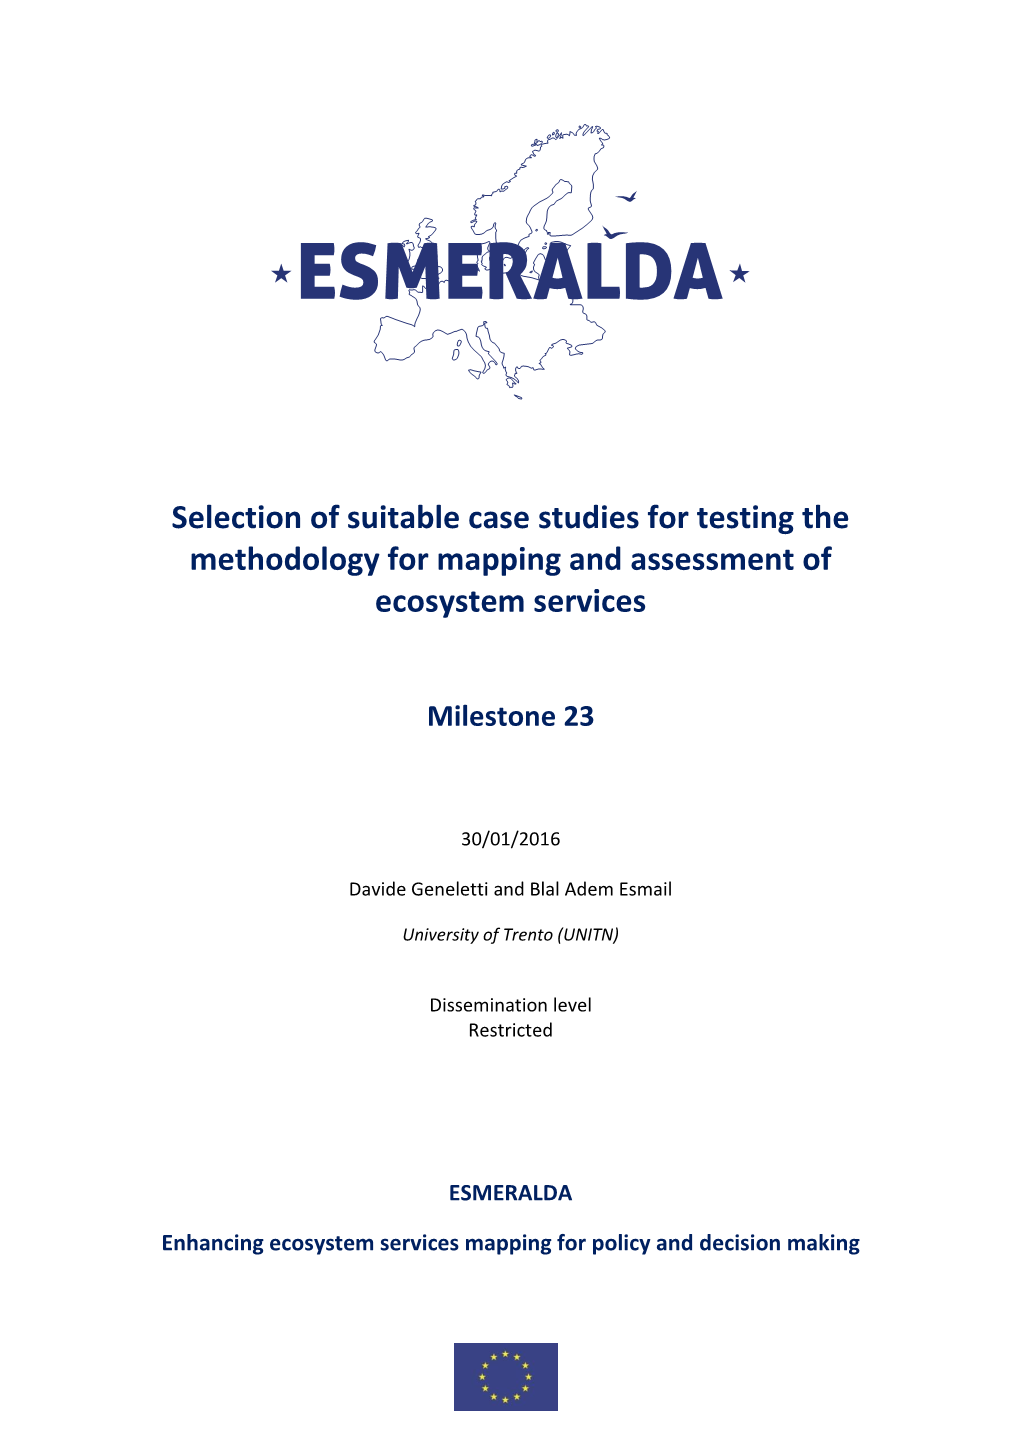 Selection of Suitable Case Studies for Testing the Methodology for Mapping and Assessment of Ecosystem Services